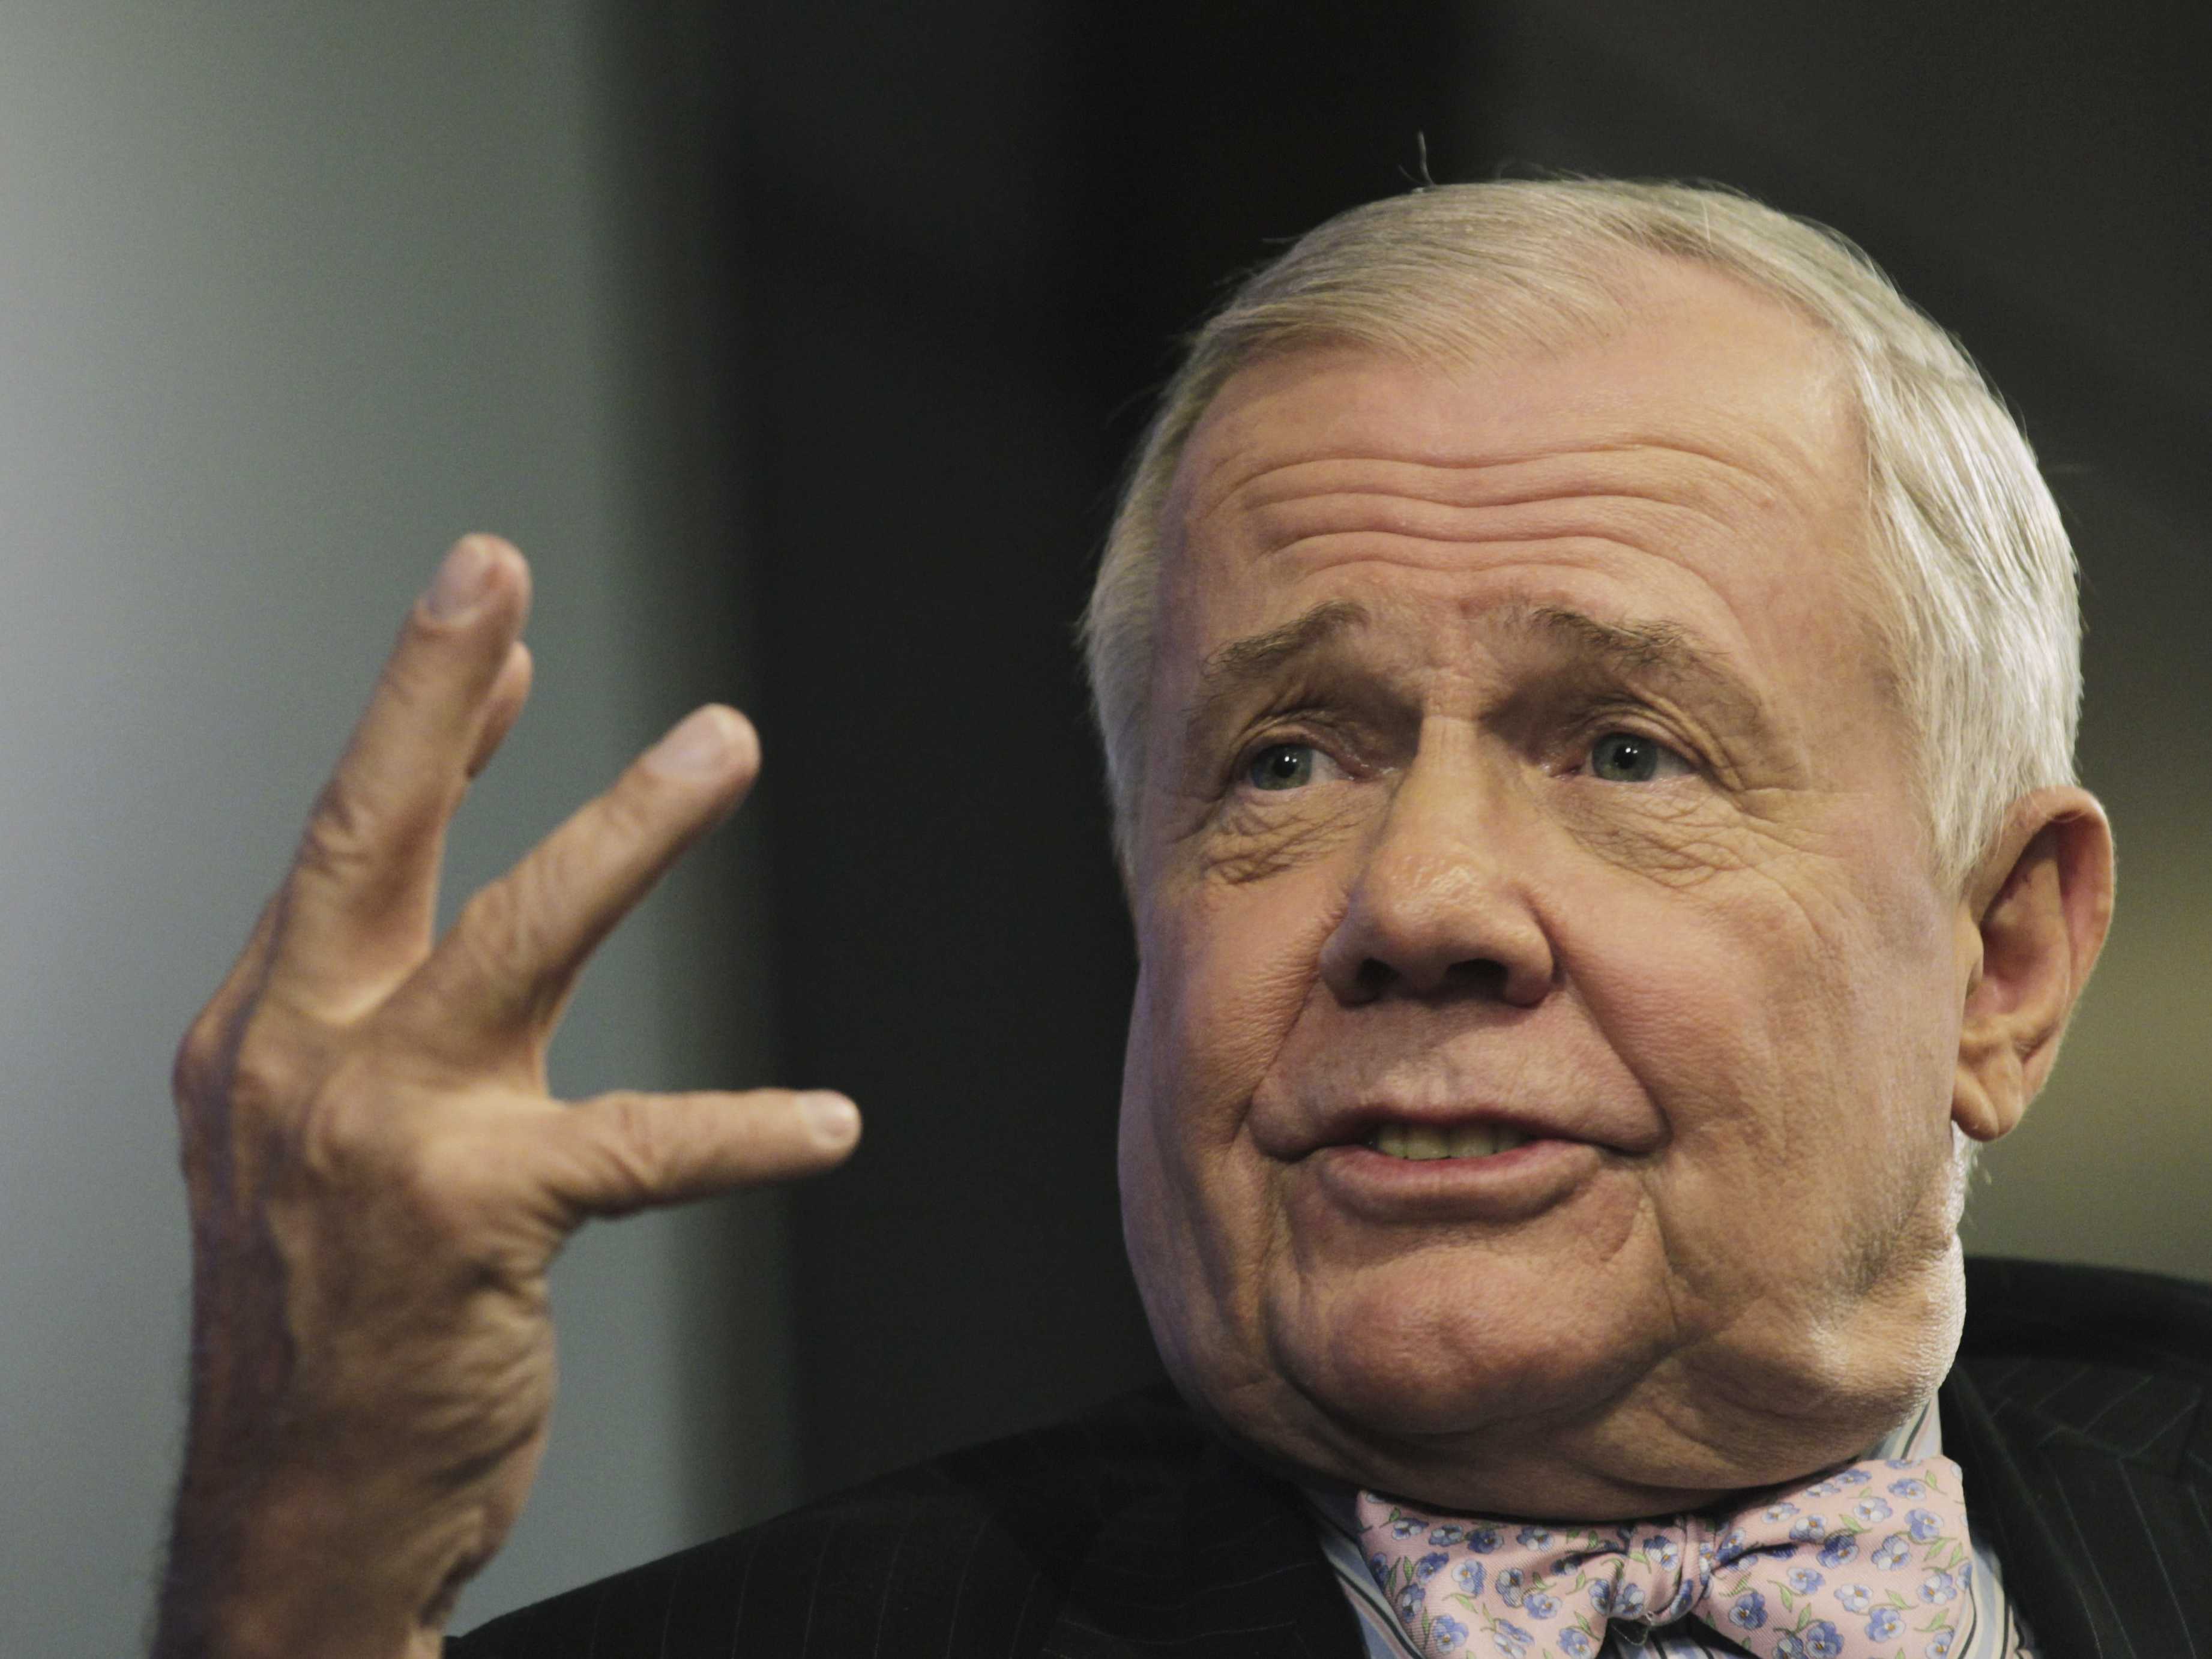 jim-rogers-making-money-is-one-of-the-most-dangerous-things-you-can-do-as-an-investor